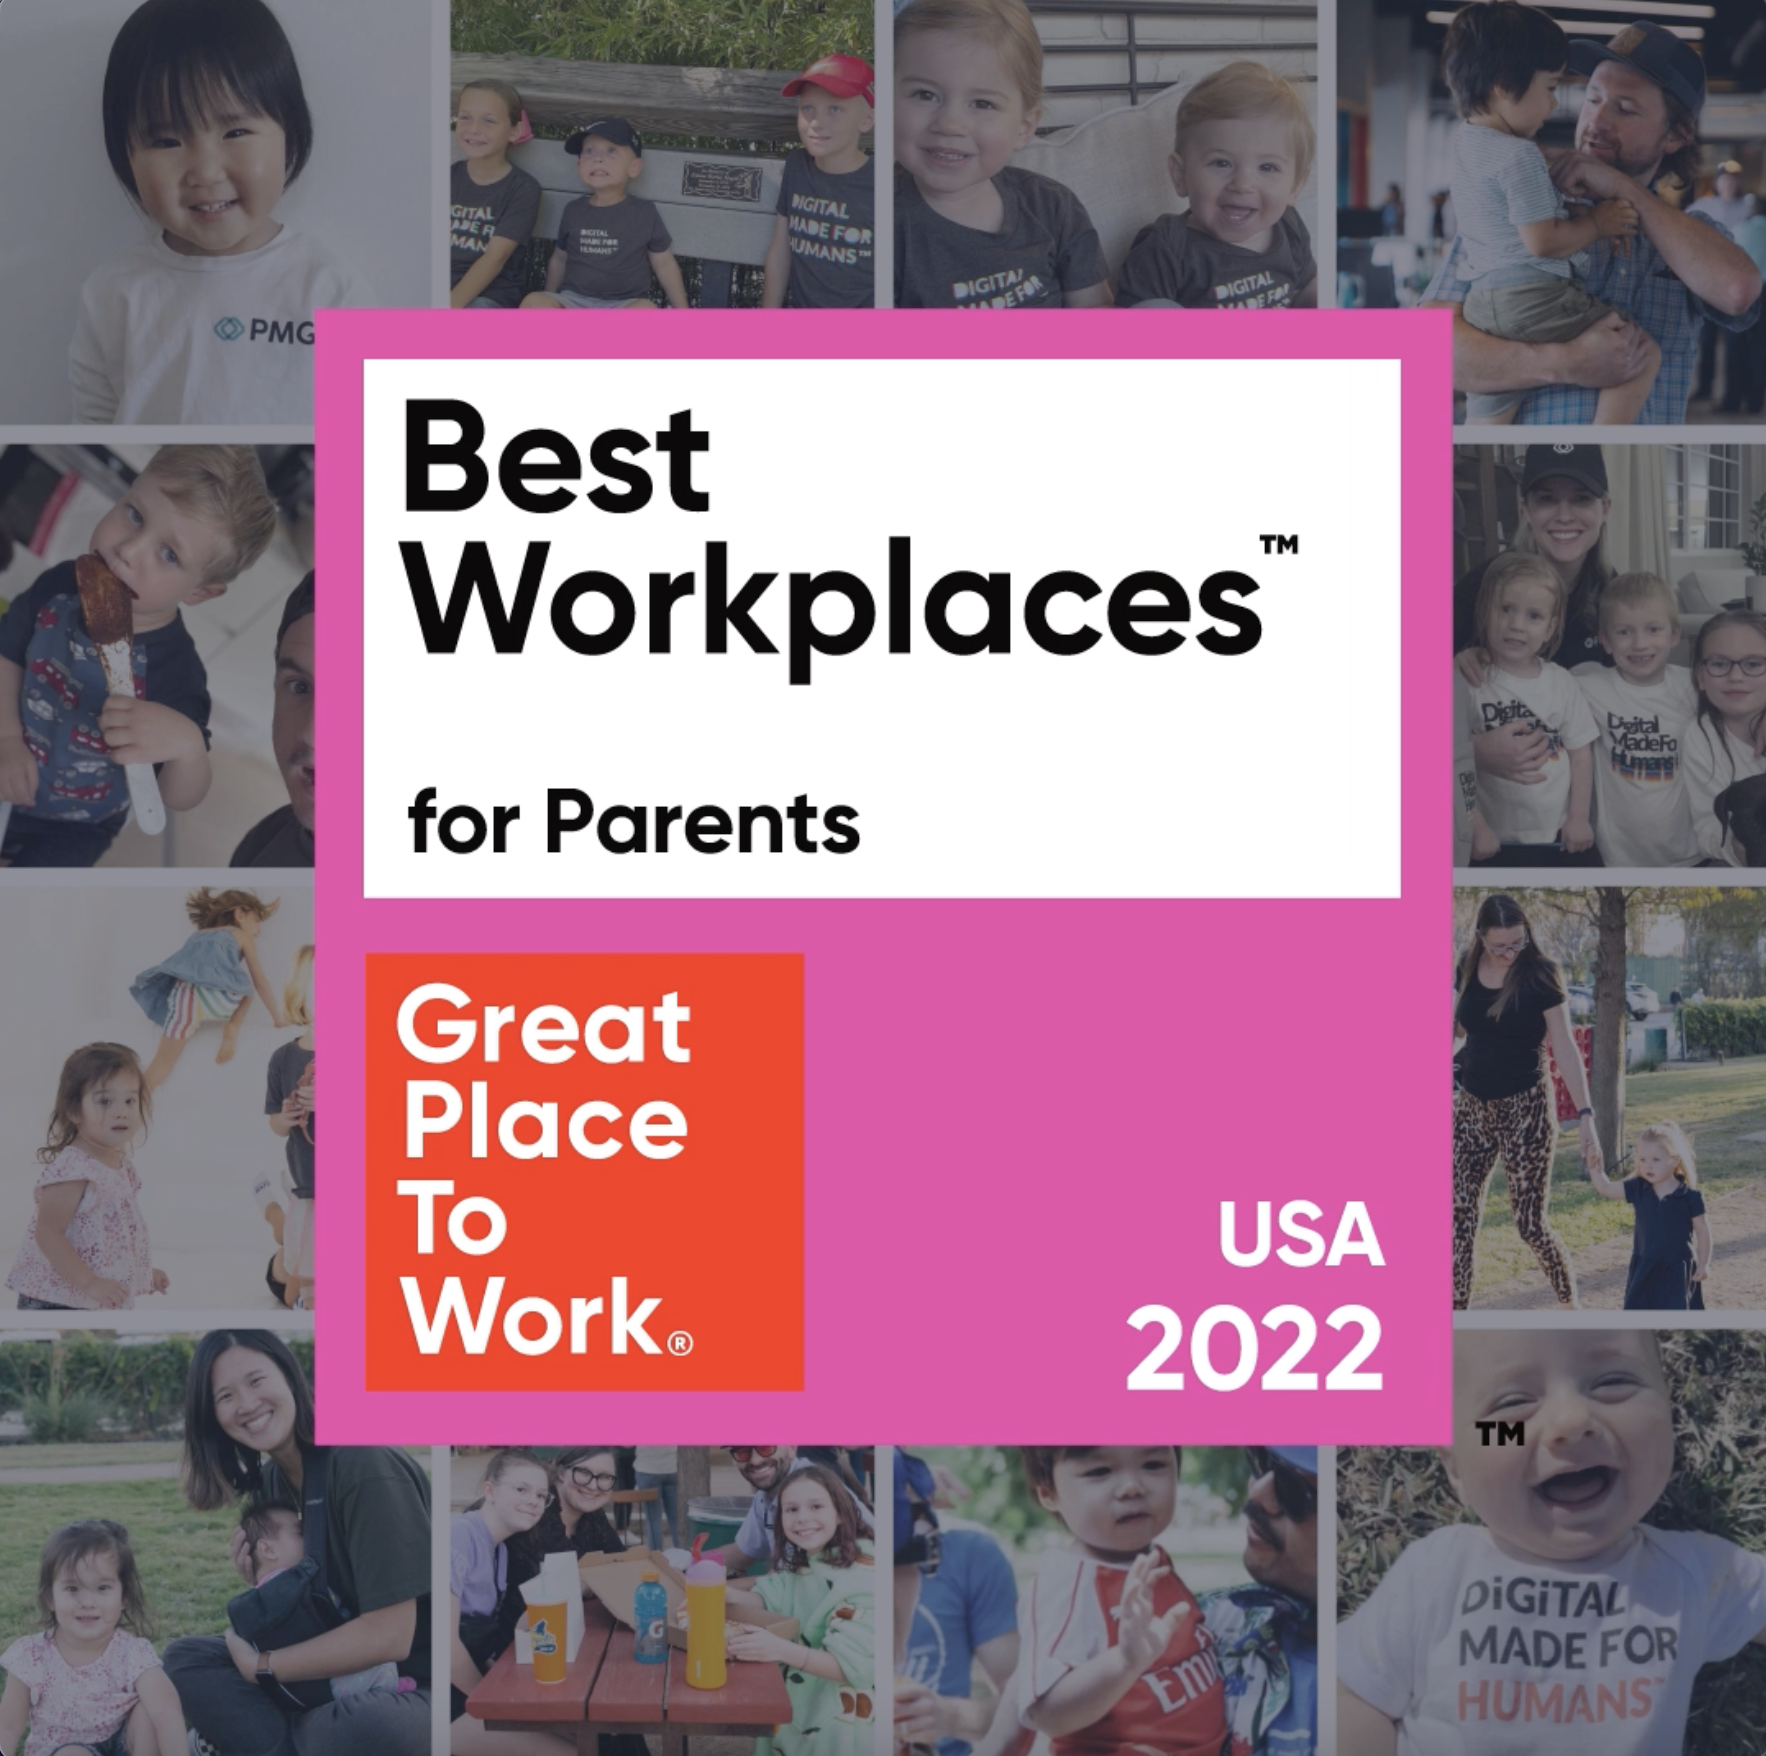 PMG Named Among the 2022 Best Workplaces for Parents™